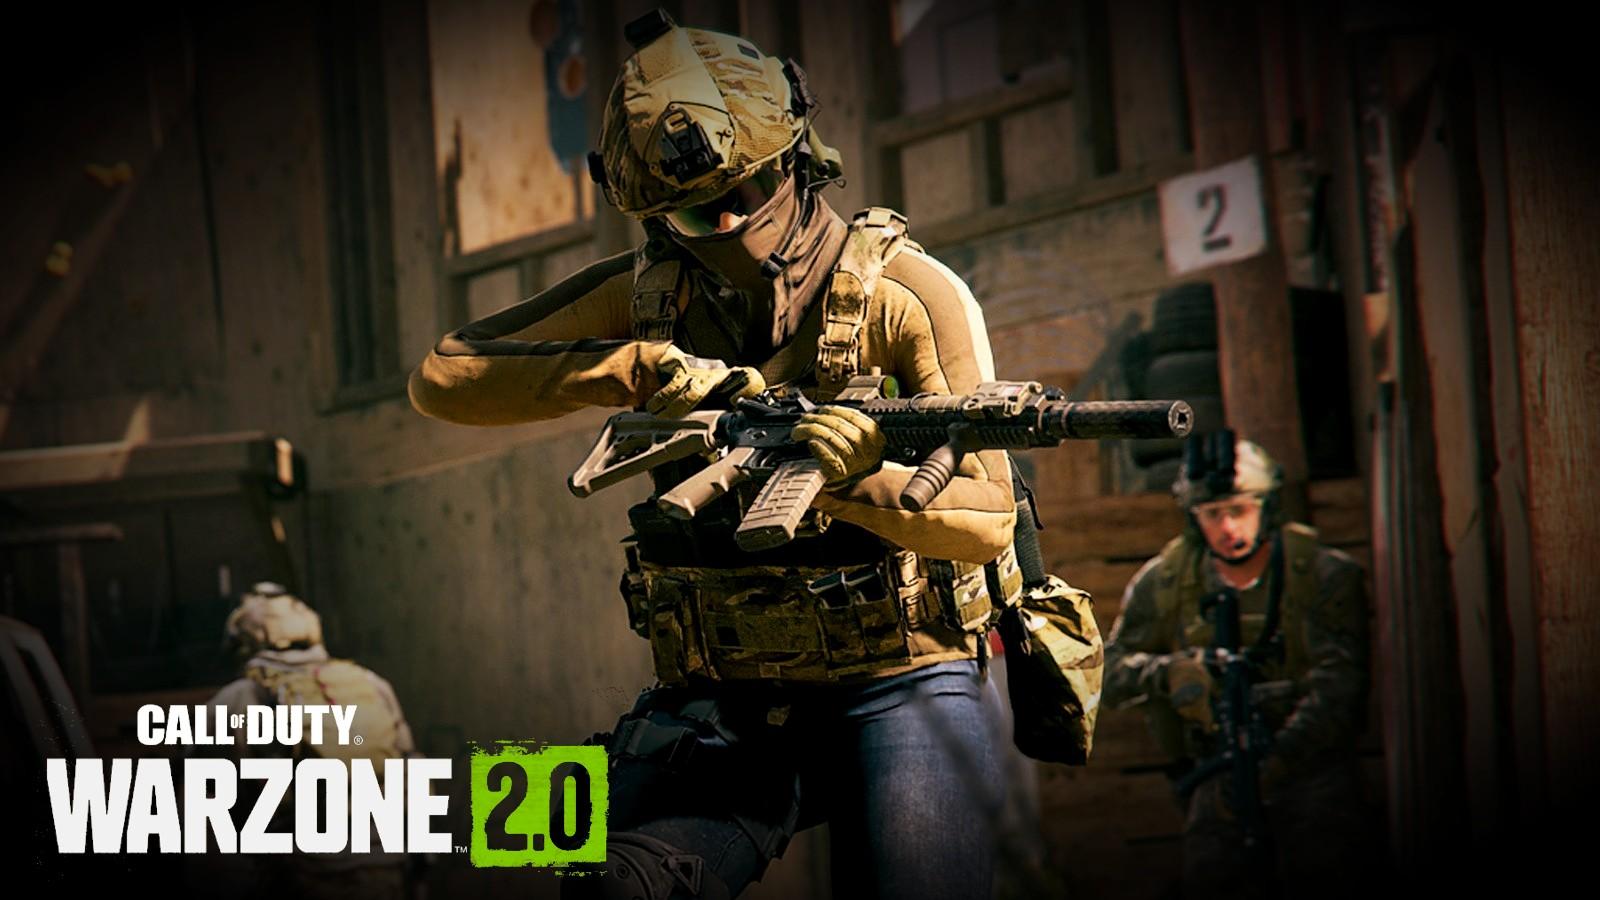 Warzone 2 Season 2 Reloaded is already getting loads of great content